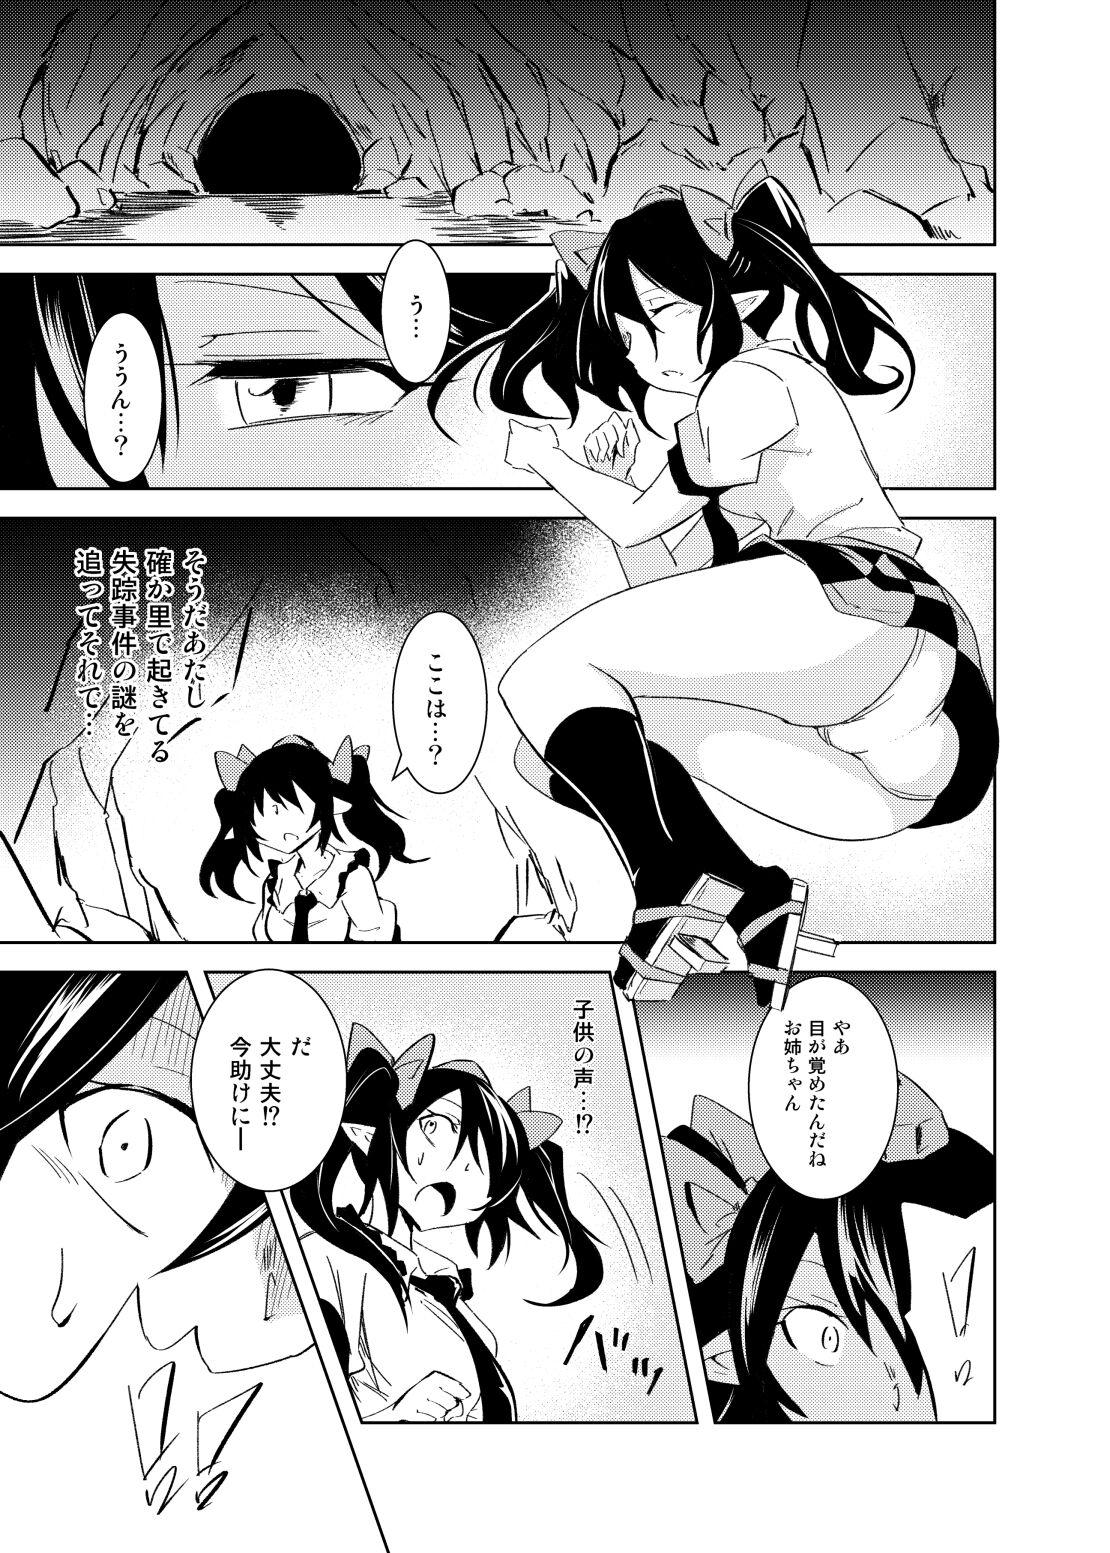 Oral Sex Tententengu no Tentacle - Touhou project Tight - Page 2